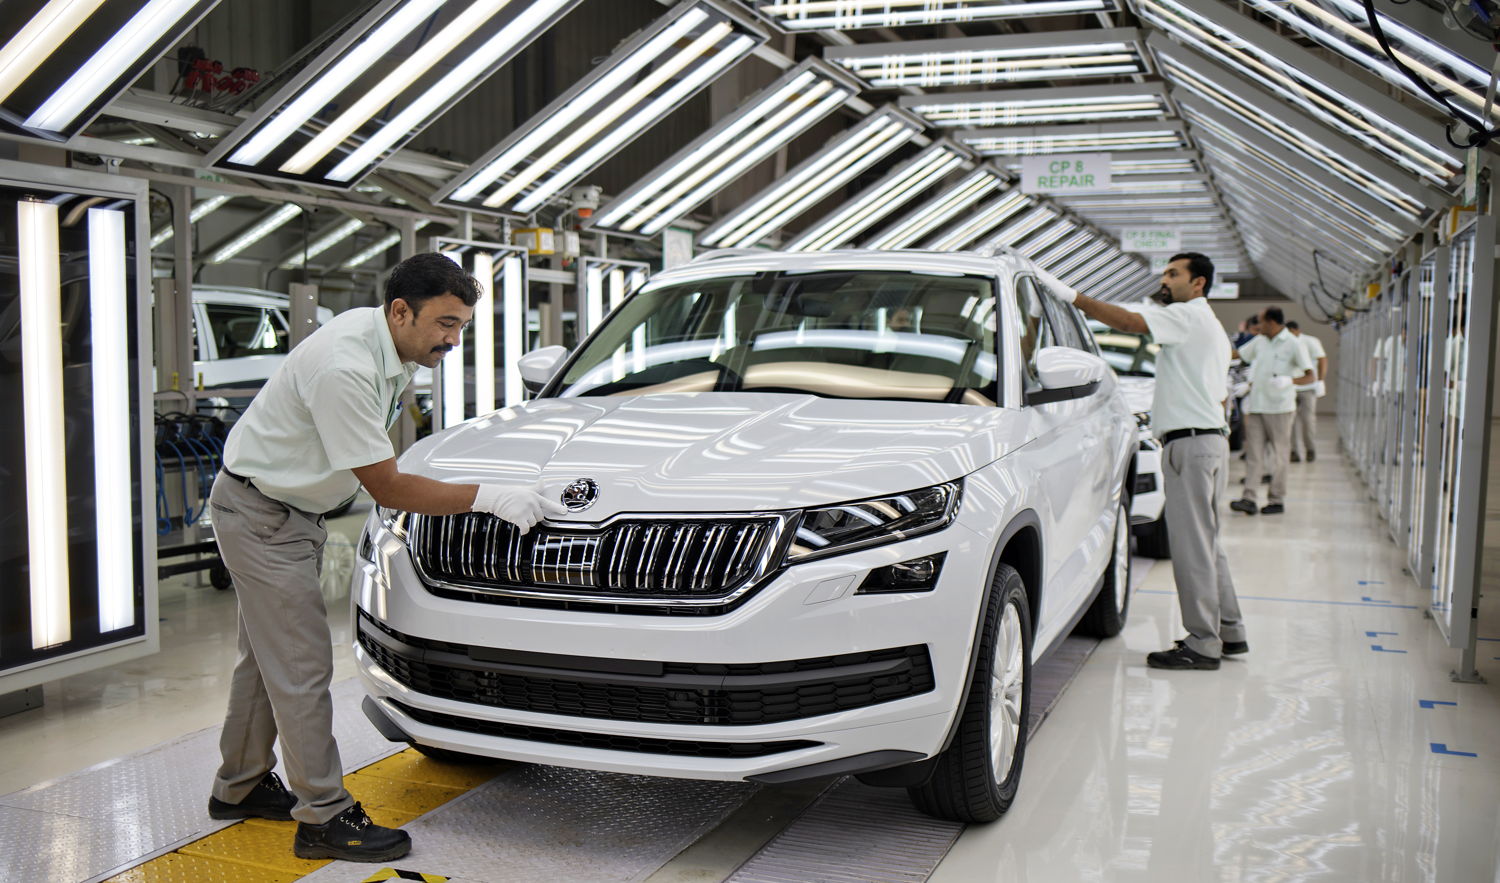 The Volkswagen Group has announced its intent to merge its three Indian subsidiaries: Volkswagen India Private Ltd (VWIPL), Volkswagen Group Sales India Private Ltd (NSC) and SKODA AUTO India Private Ltd (SAIPL). The merger has been considered and approved by the Boards of the three companies in India and is now subject to the necessary regulatory and statutory approvals.